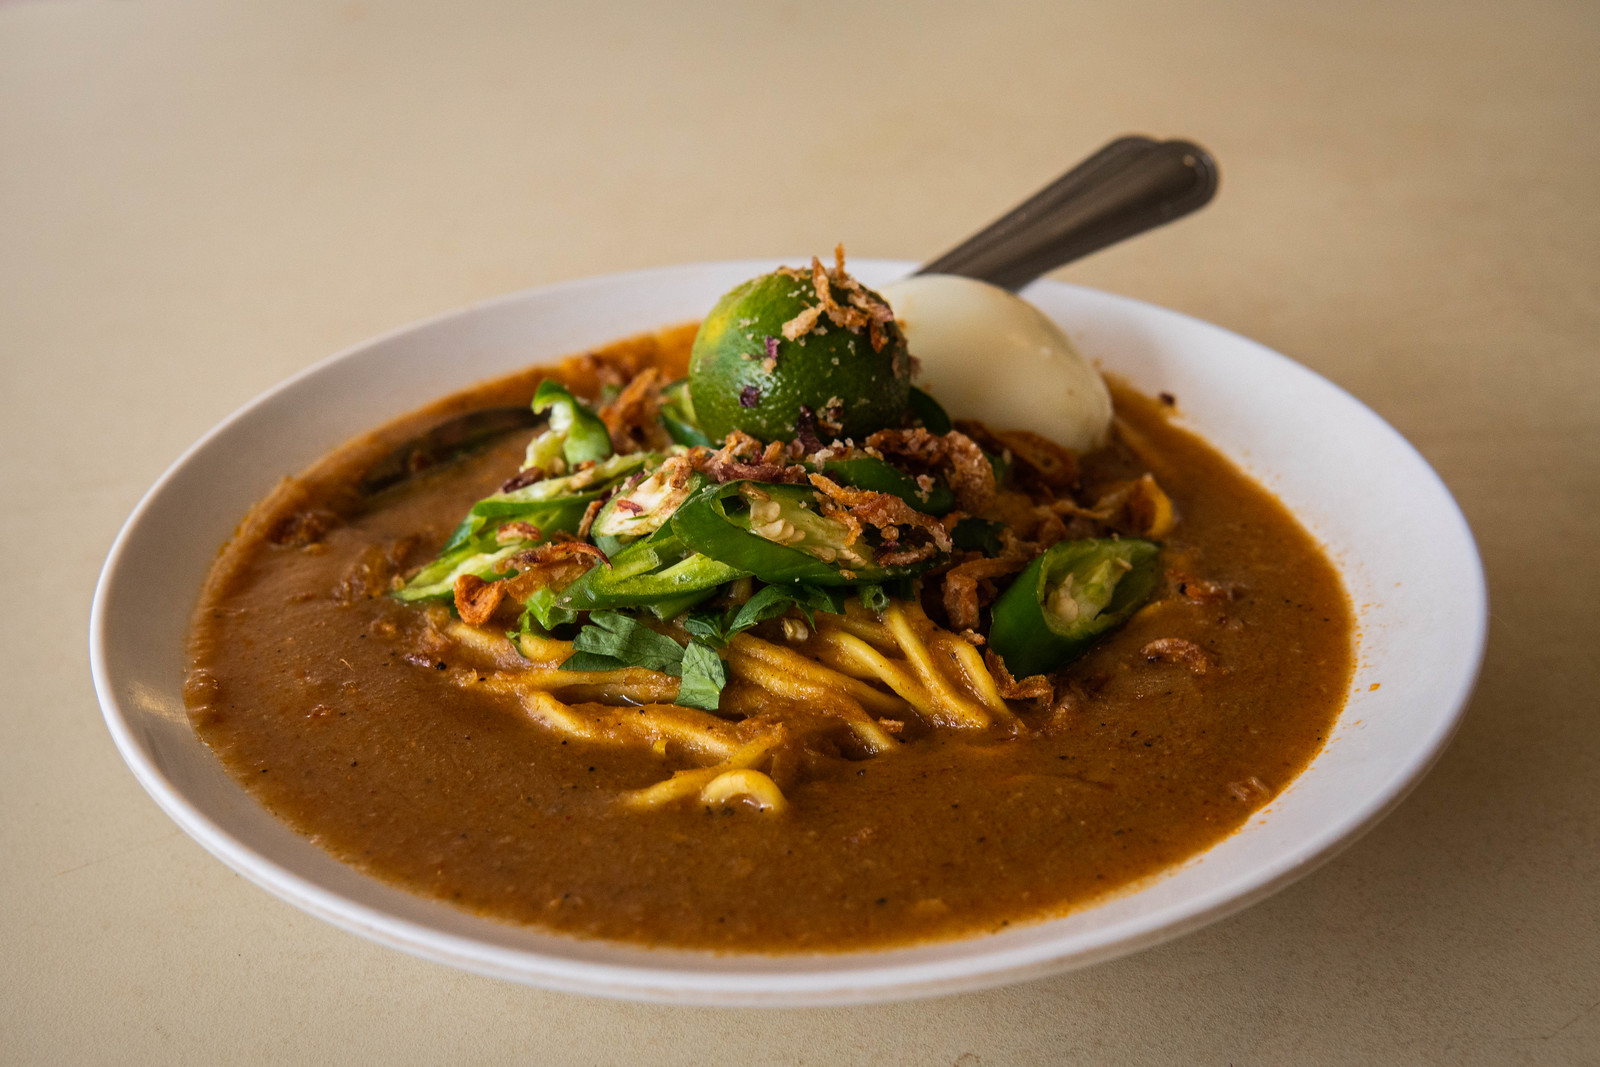 A plate of Mee Rebus